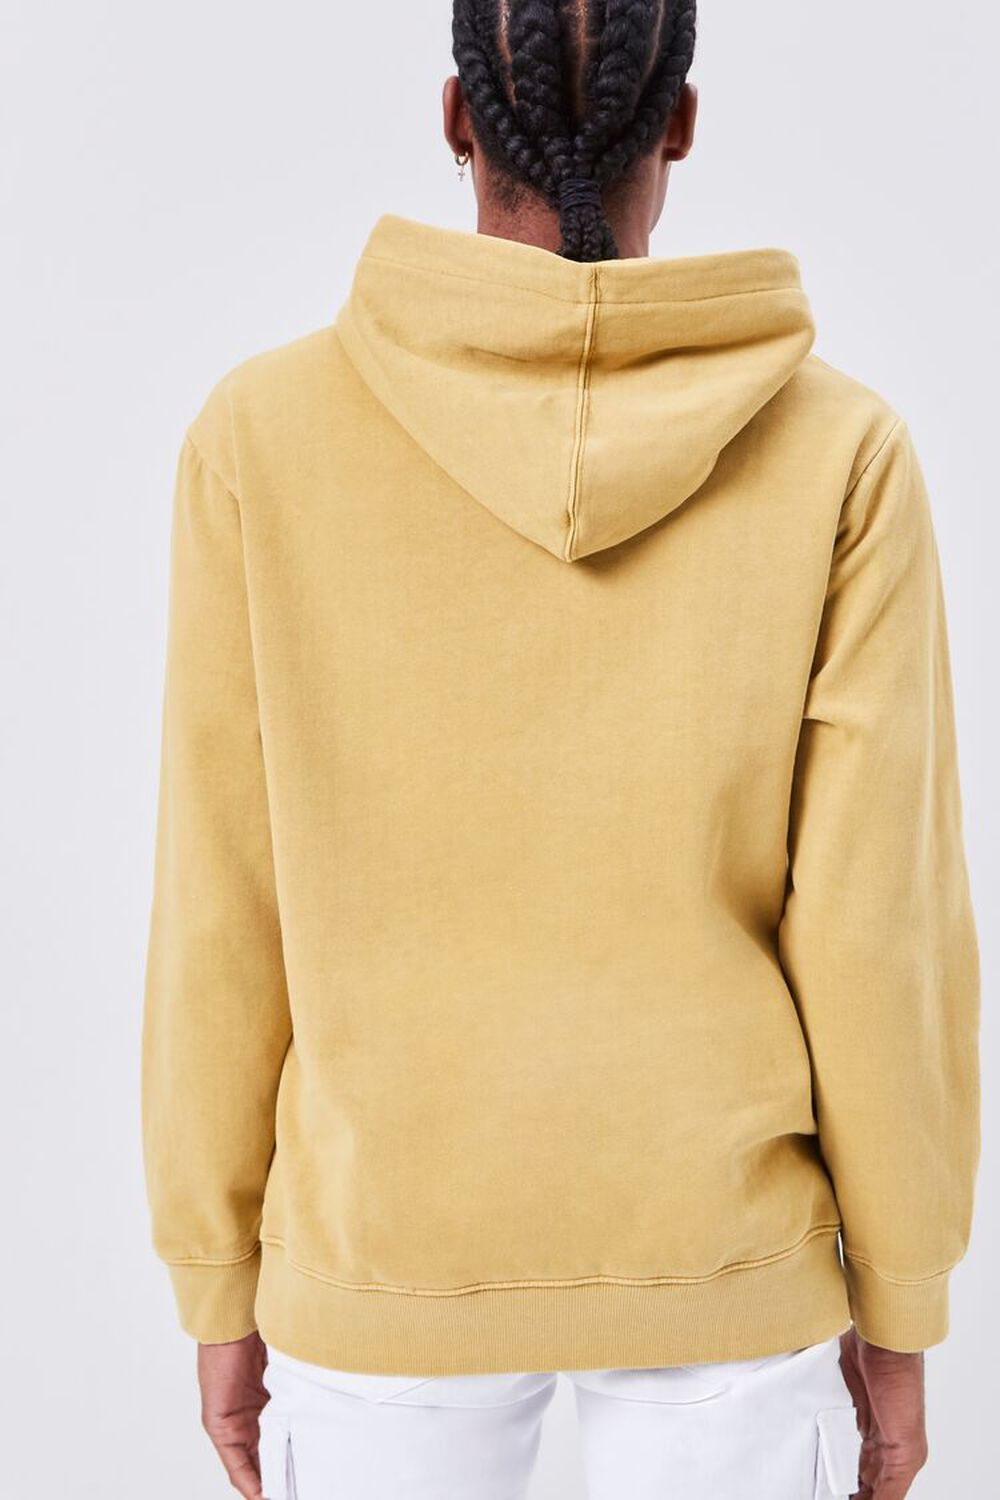 TAUPE/YELLOW Butterfly Embroidered Graphic Hoodie, image 3